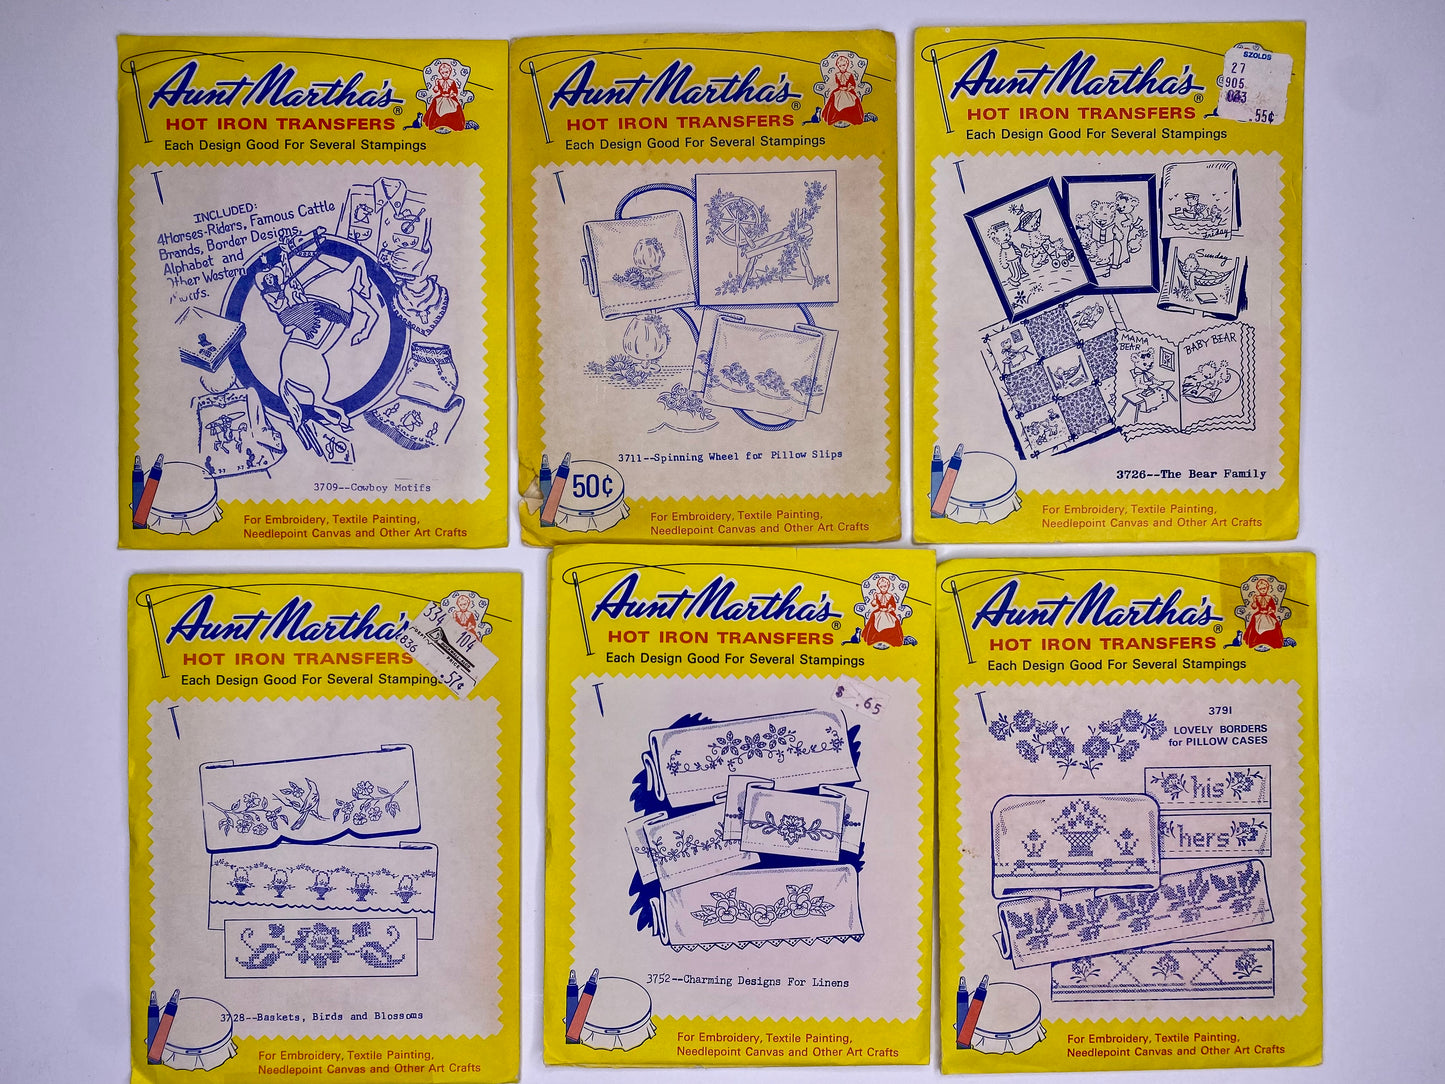 Aunt Martha's Hot Iron Transfers 3709 Cowboy Motifs, 3728 Baskets/ Birds/ Blossoms, 3711 Spinning Wheel, 3752 Charming Designs, 3726 Bear Family, 3791 Lovely Borders